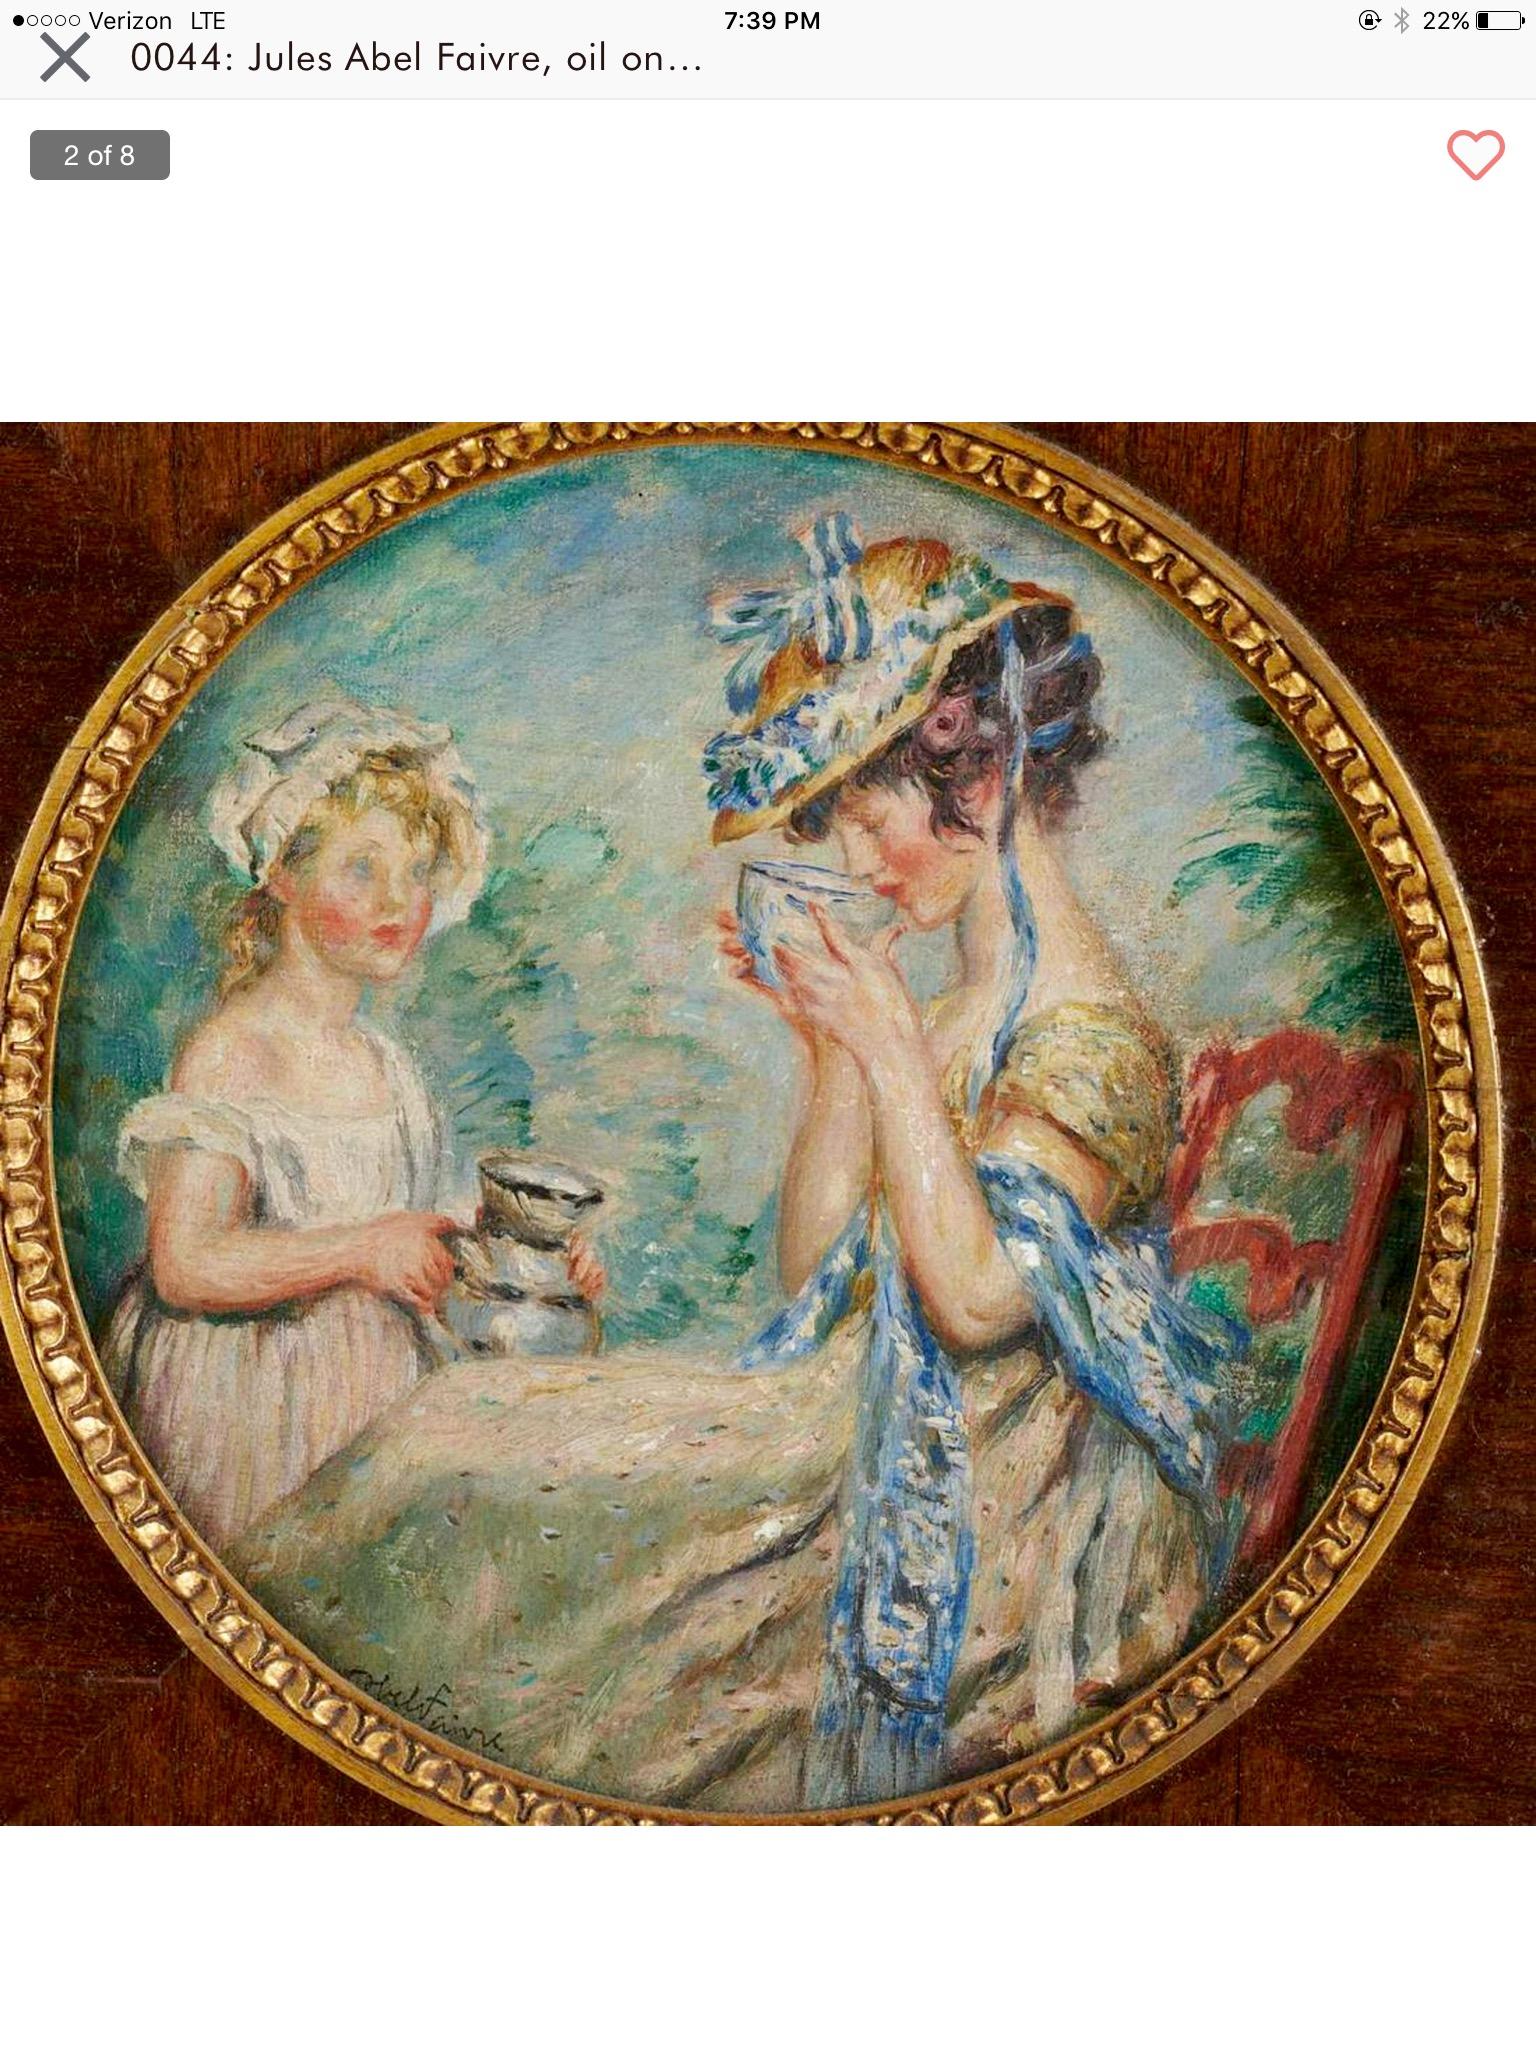 “Afternoon Tea” - Painting by Jules-Abel Faivre